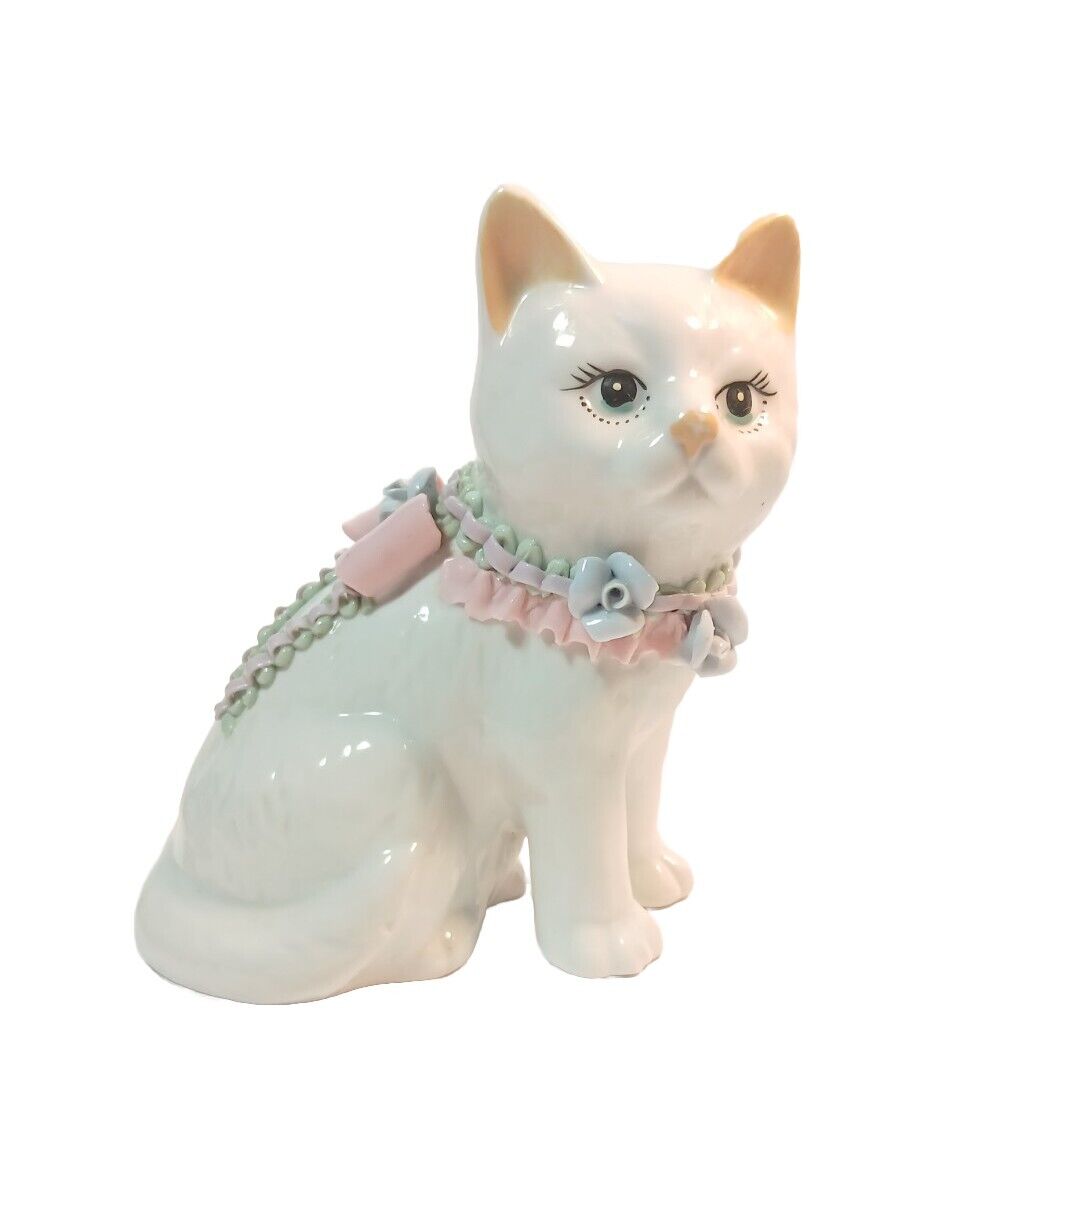 Vintage Kitchy Kitty Cat White Porcelain 6 in Figurine Adorned Flowers and Bows